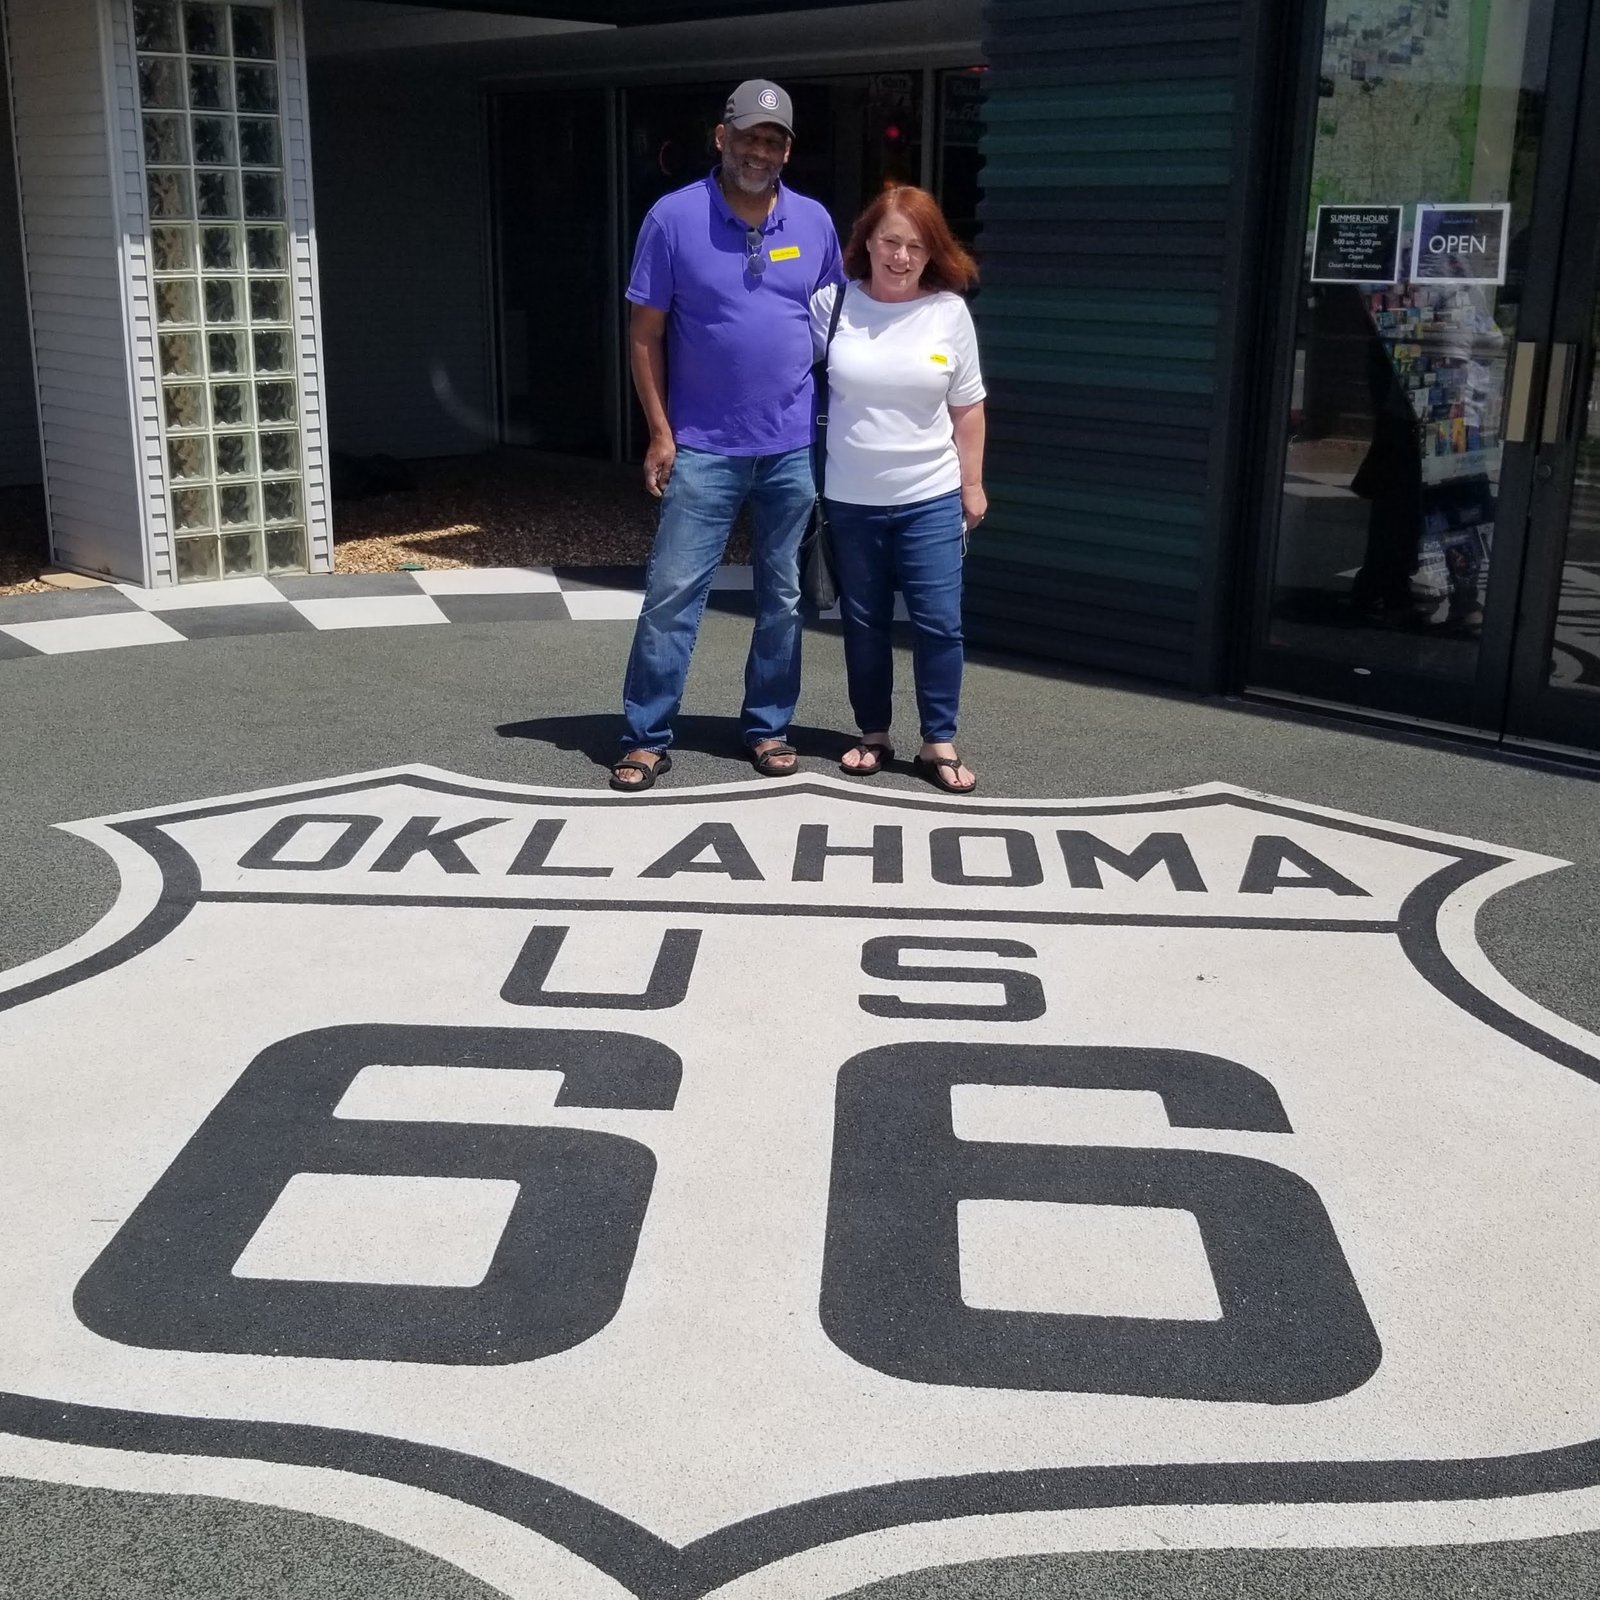 2020 Road Trip – I40 (Route 66)